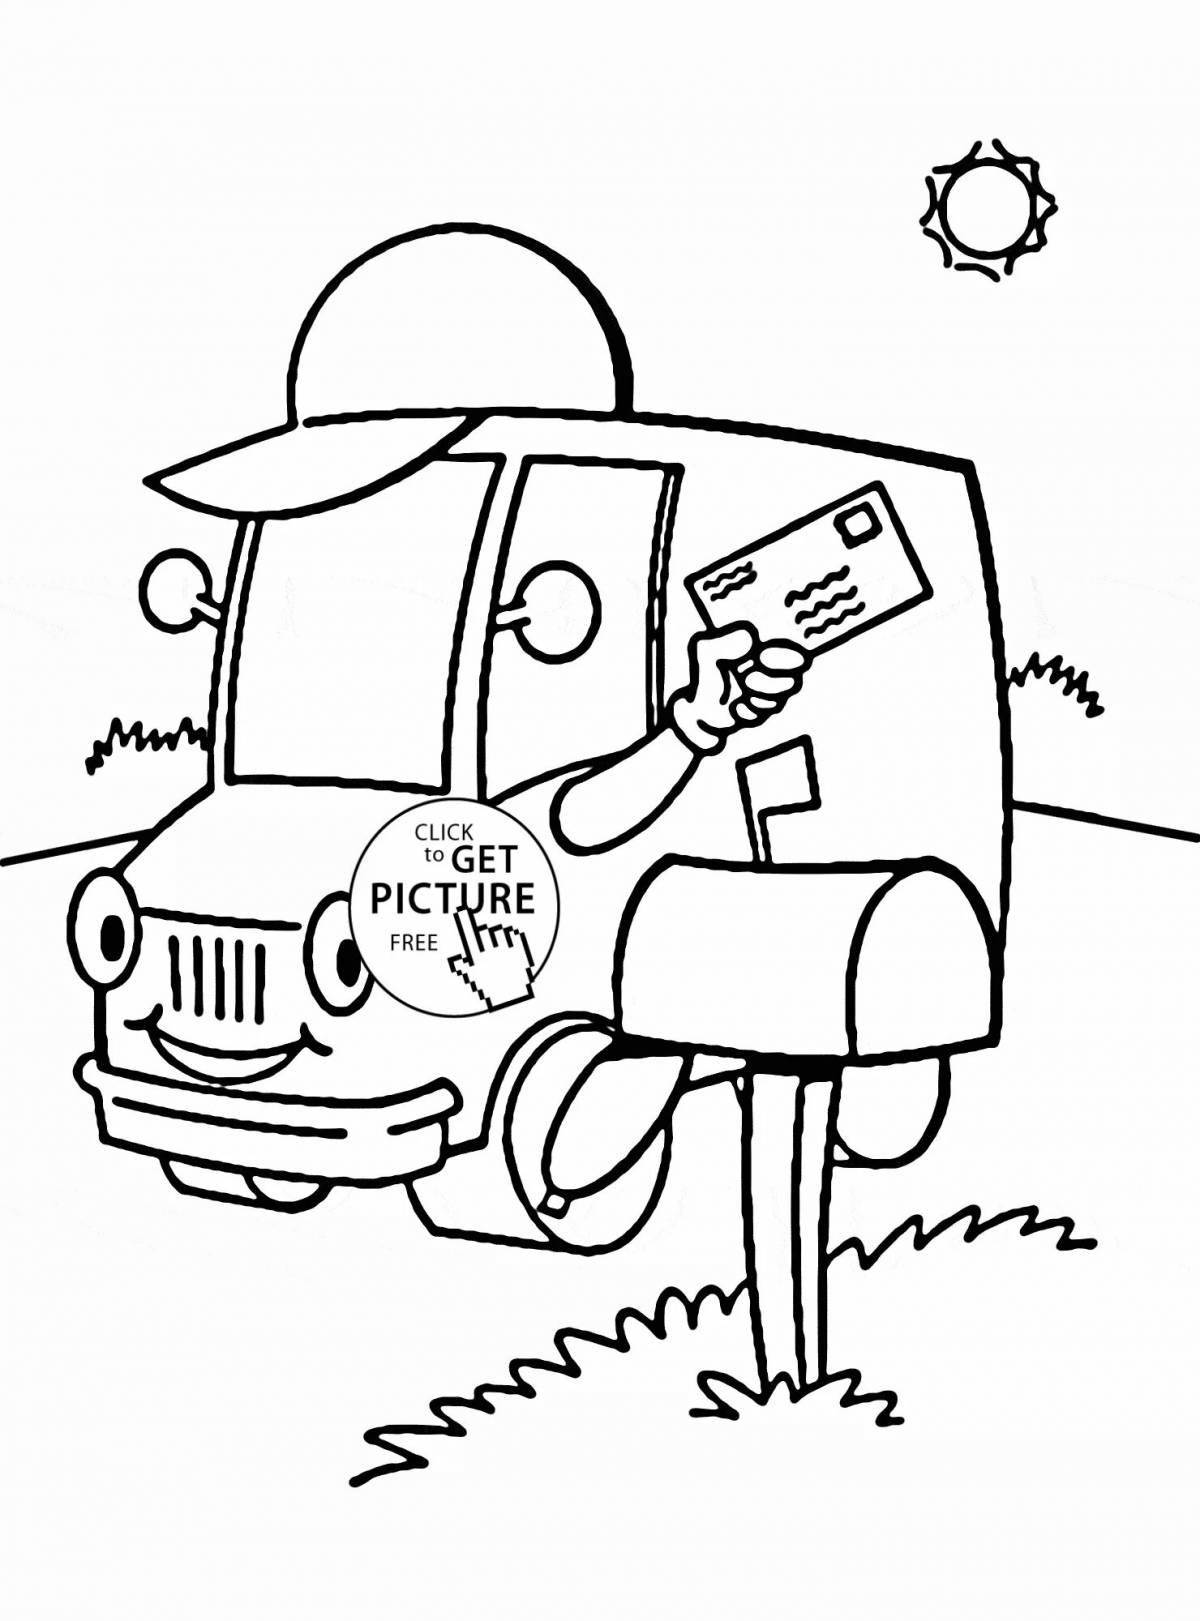 Delightful post machine coloring page